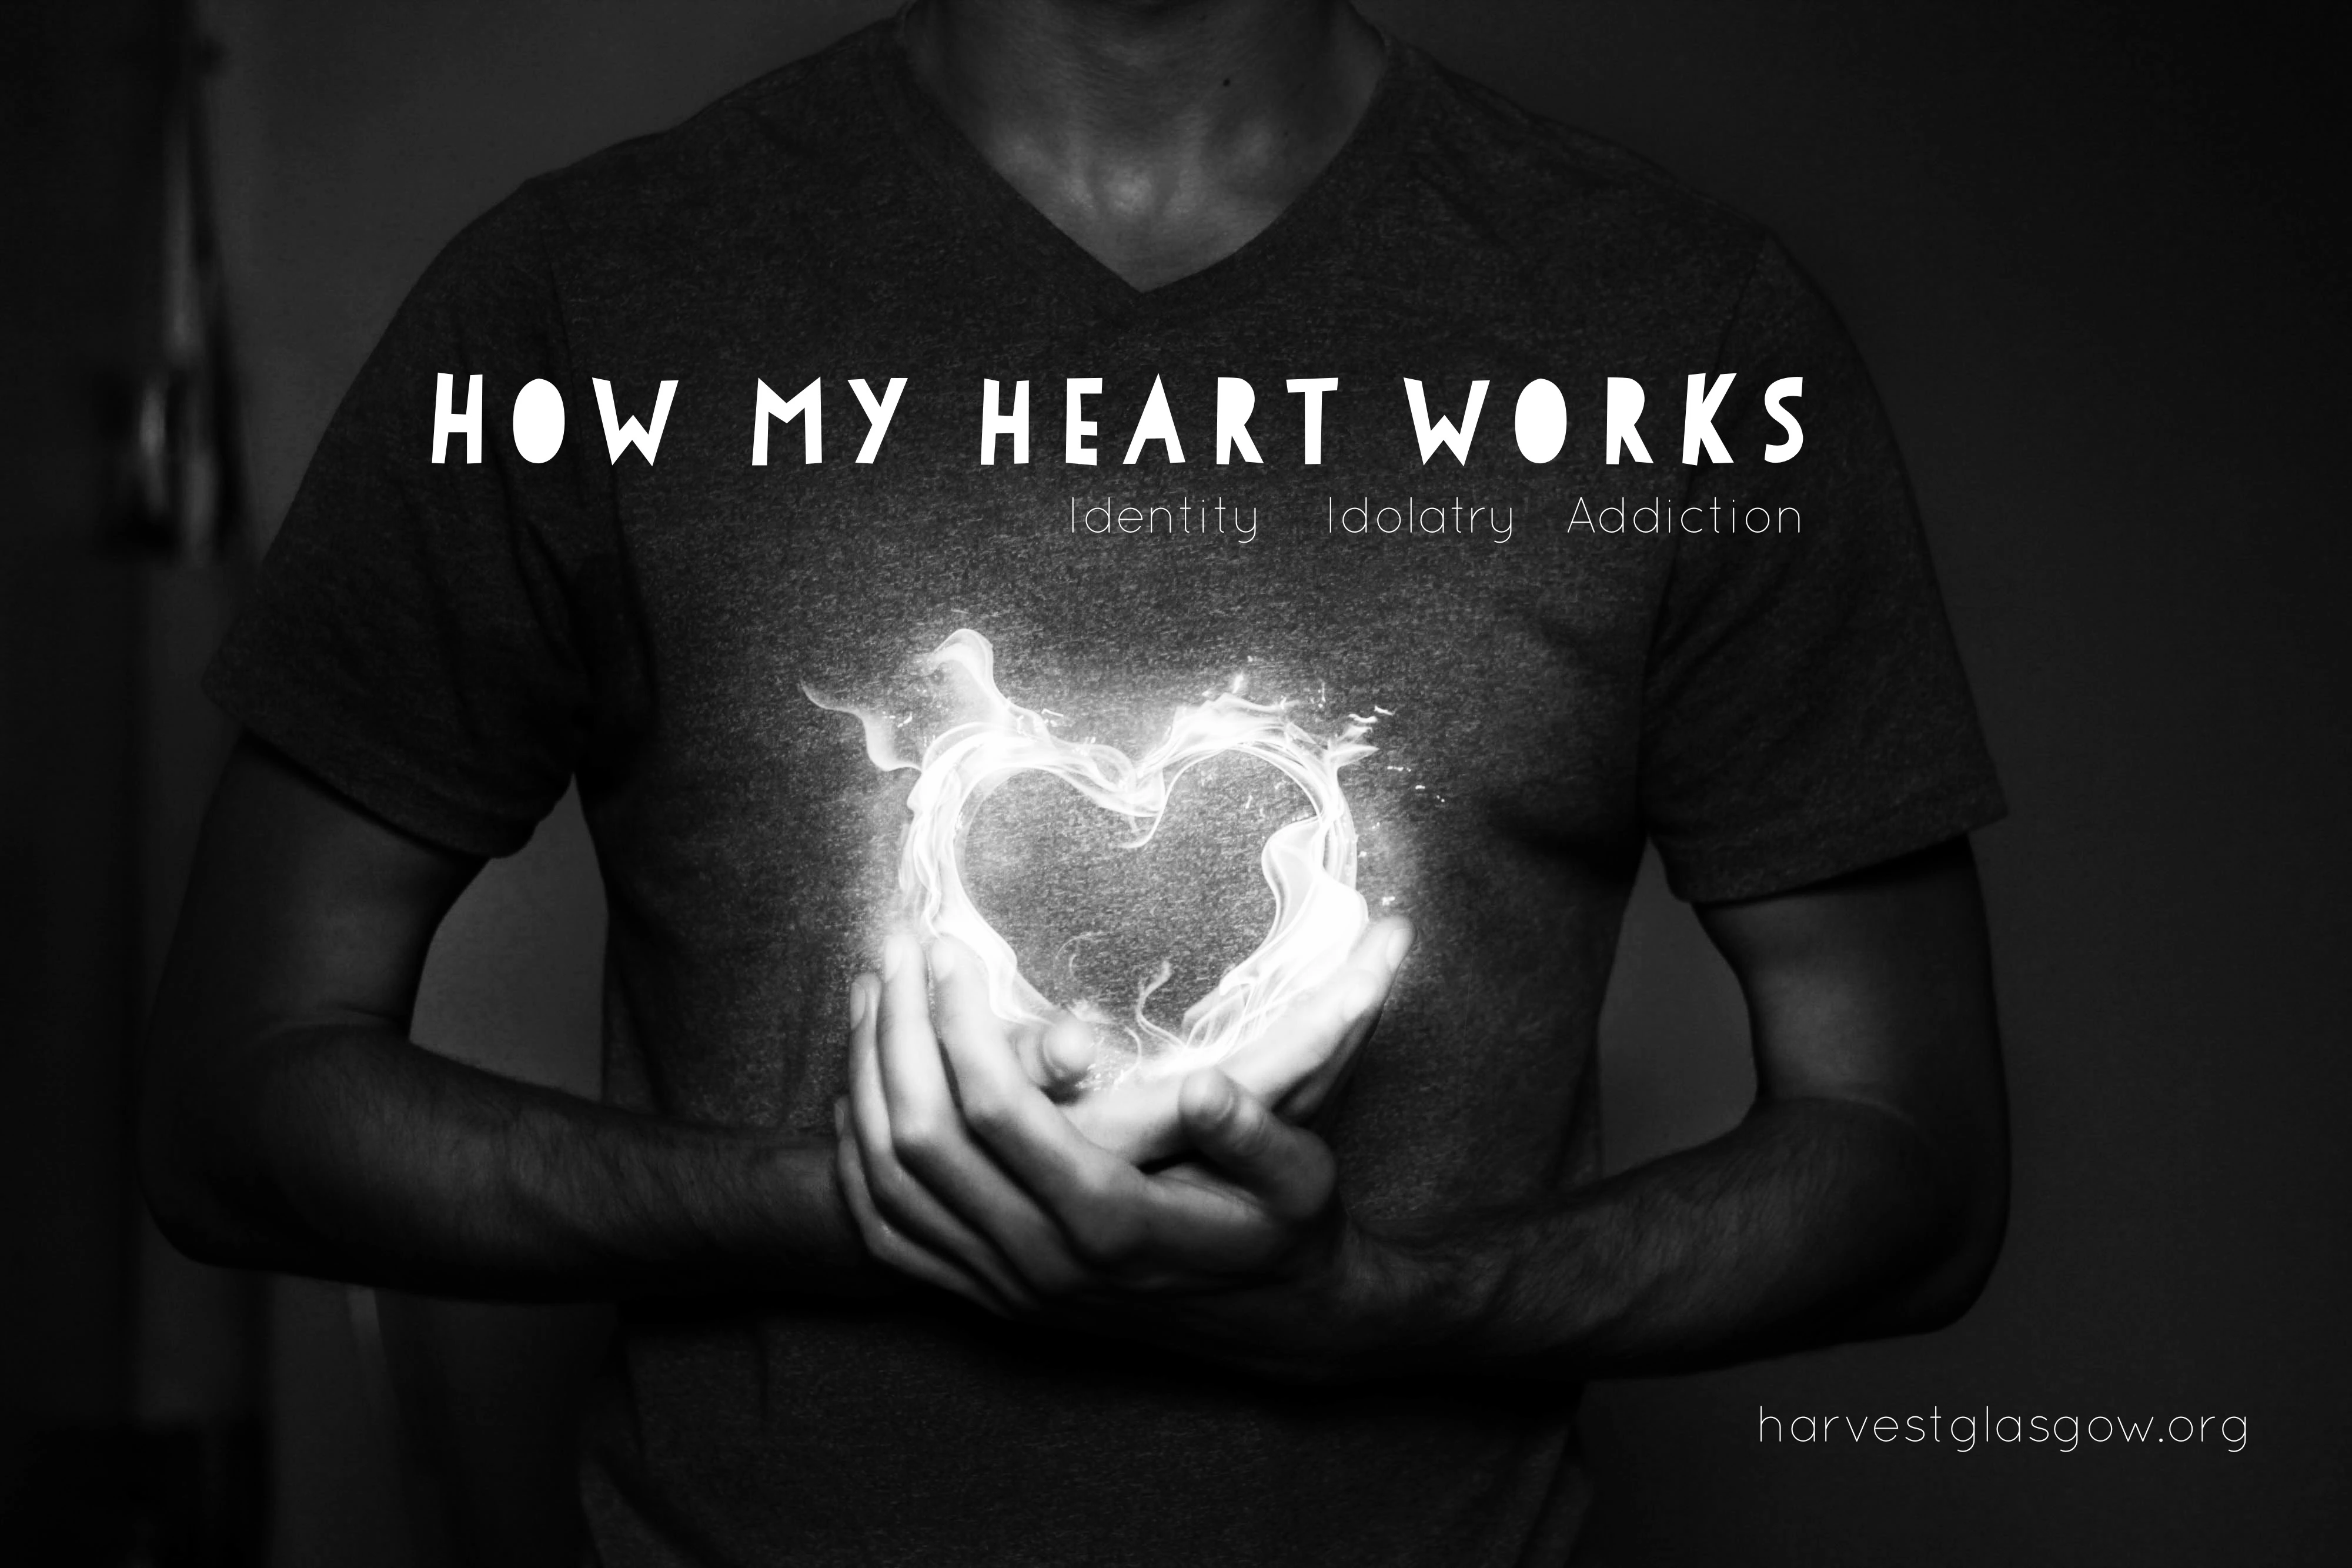 How my heart works